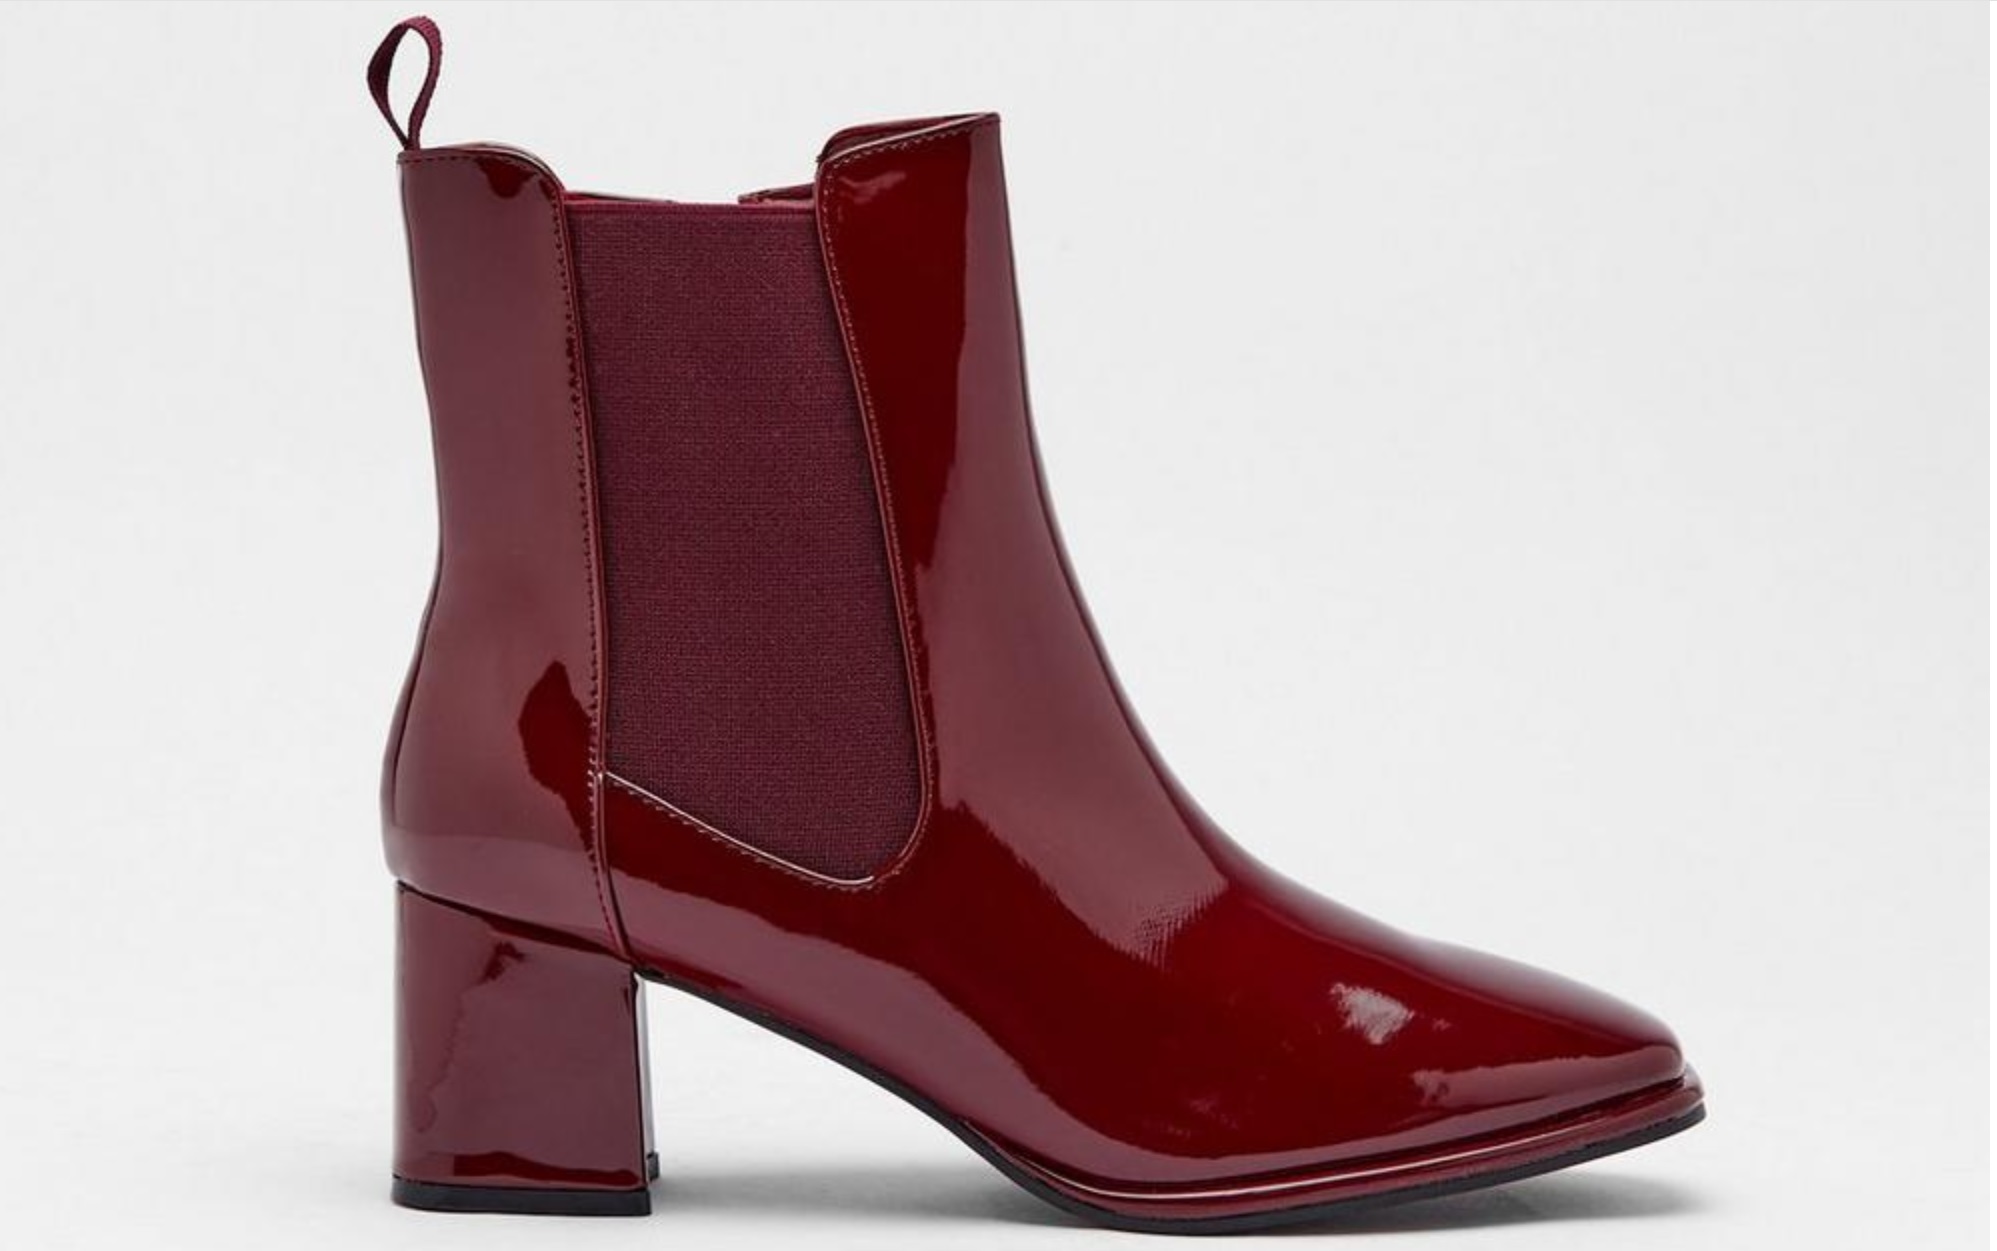 Save £16.50 on these red patent boots at Warehouse